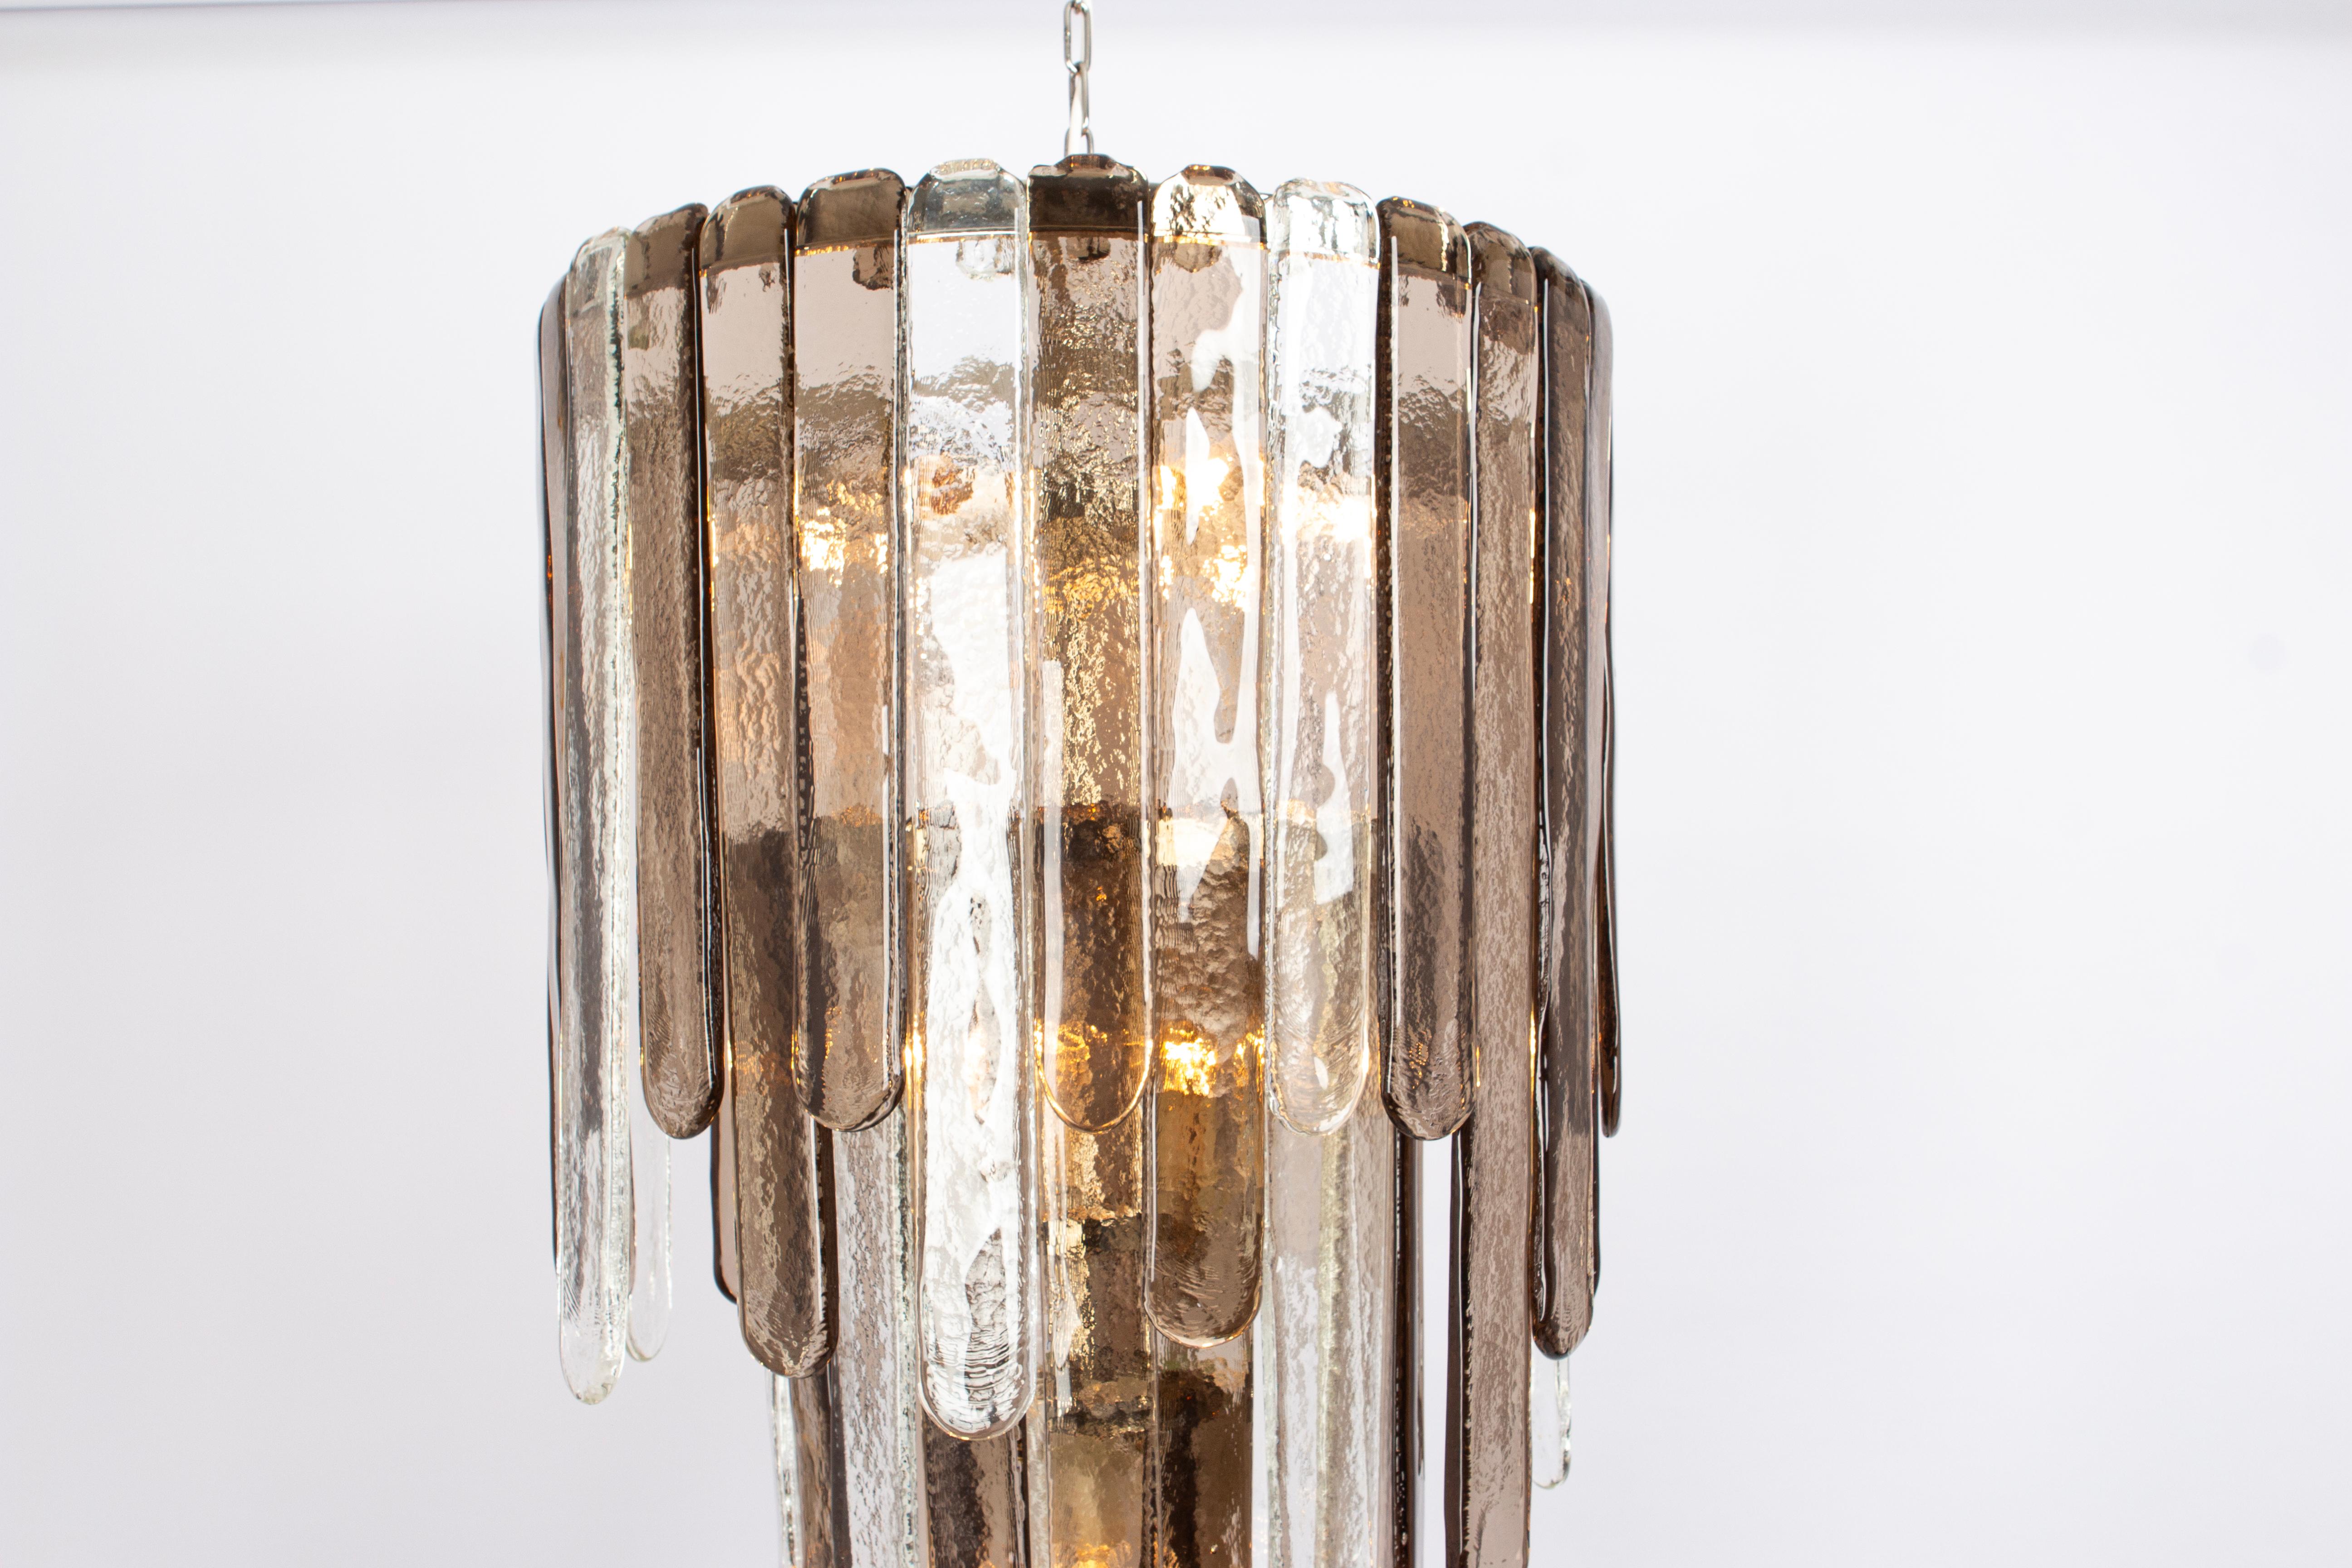 Wonderful large pendant light with many  large hand-made Murano glass pieces which are supported by a metal frame, designed by Carlo Nason for Mazzega, Italy 1970s

Heavy quality and in very good condition. Cleaned, well-wired and ready to use. The